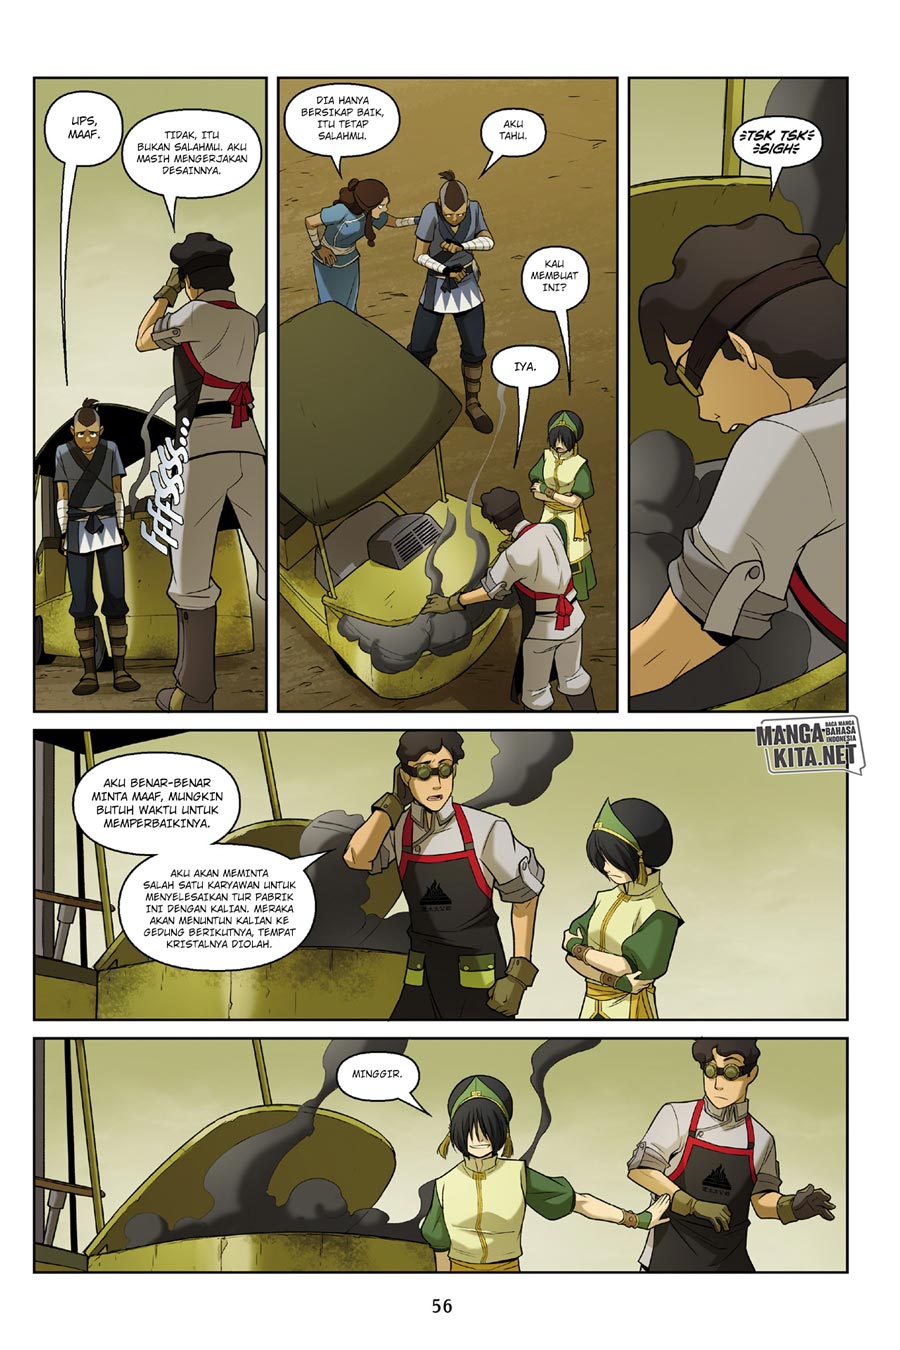 Avatar: The Last Airbender – The Rift Chapter 01.3 - 191